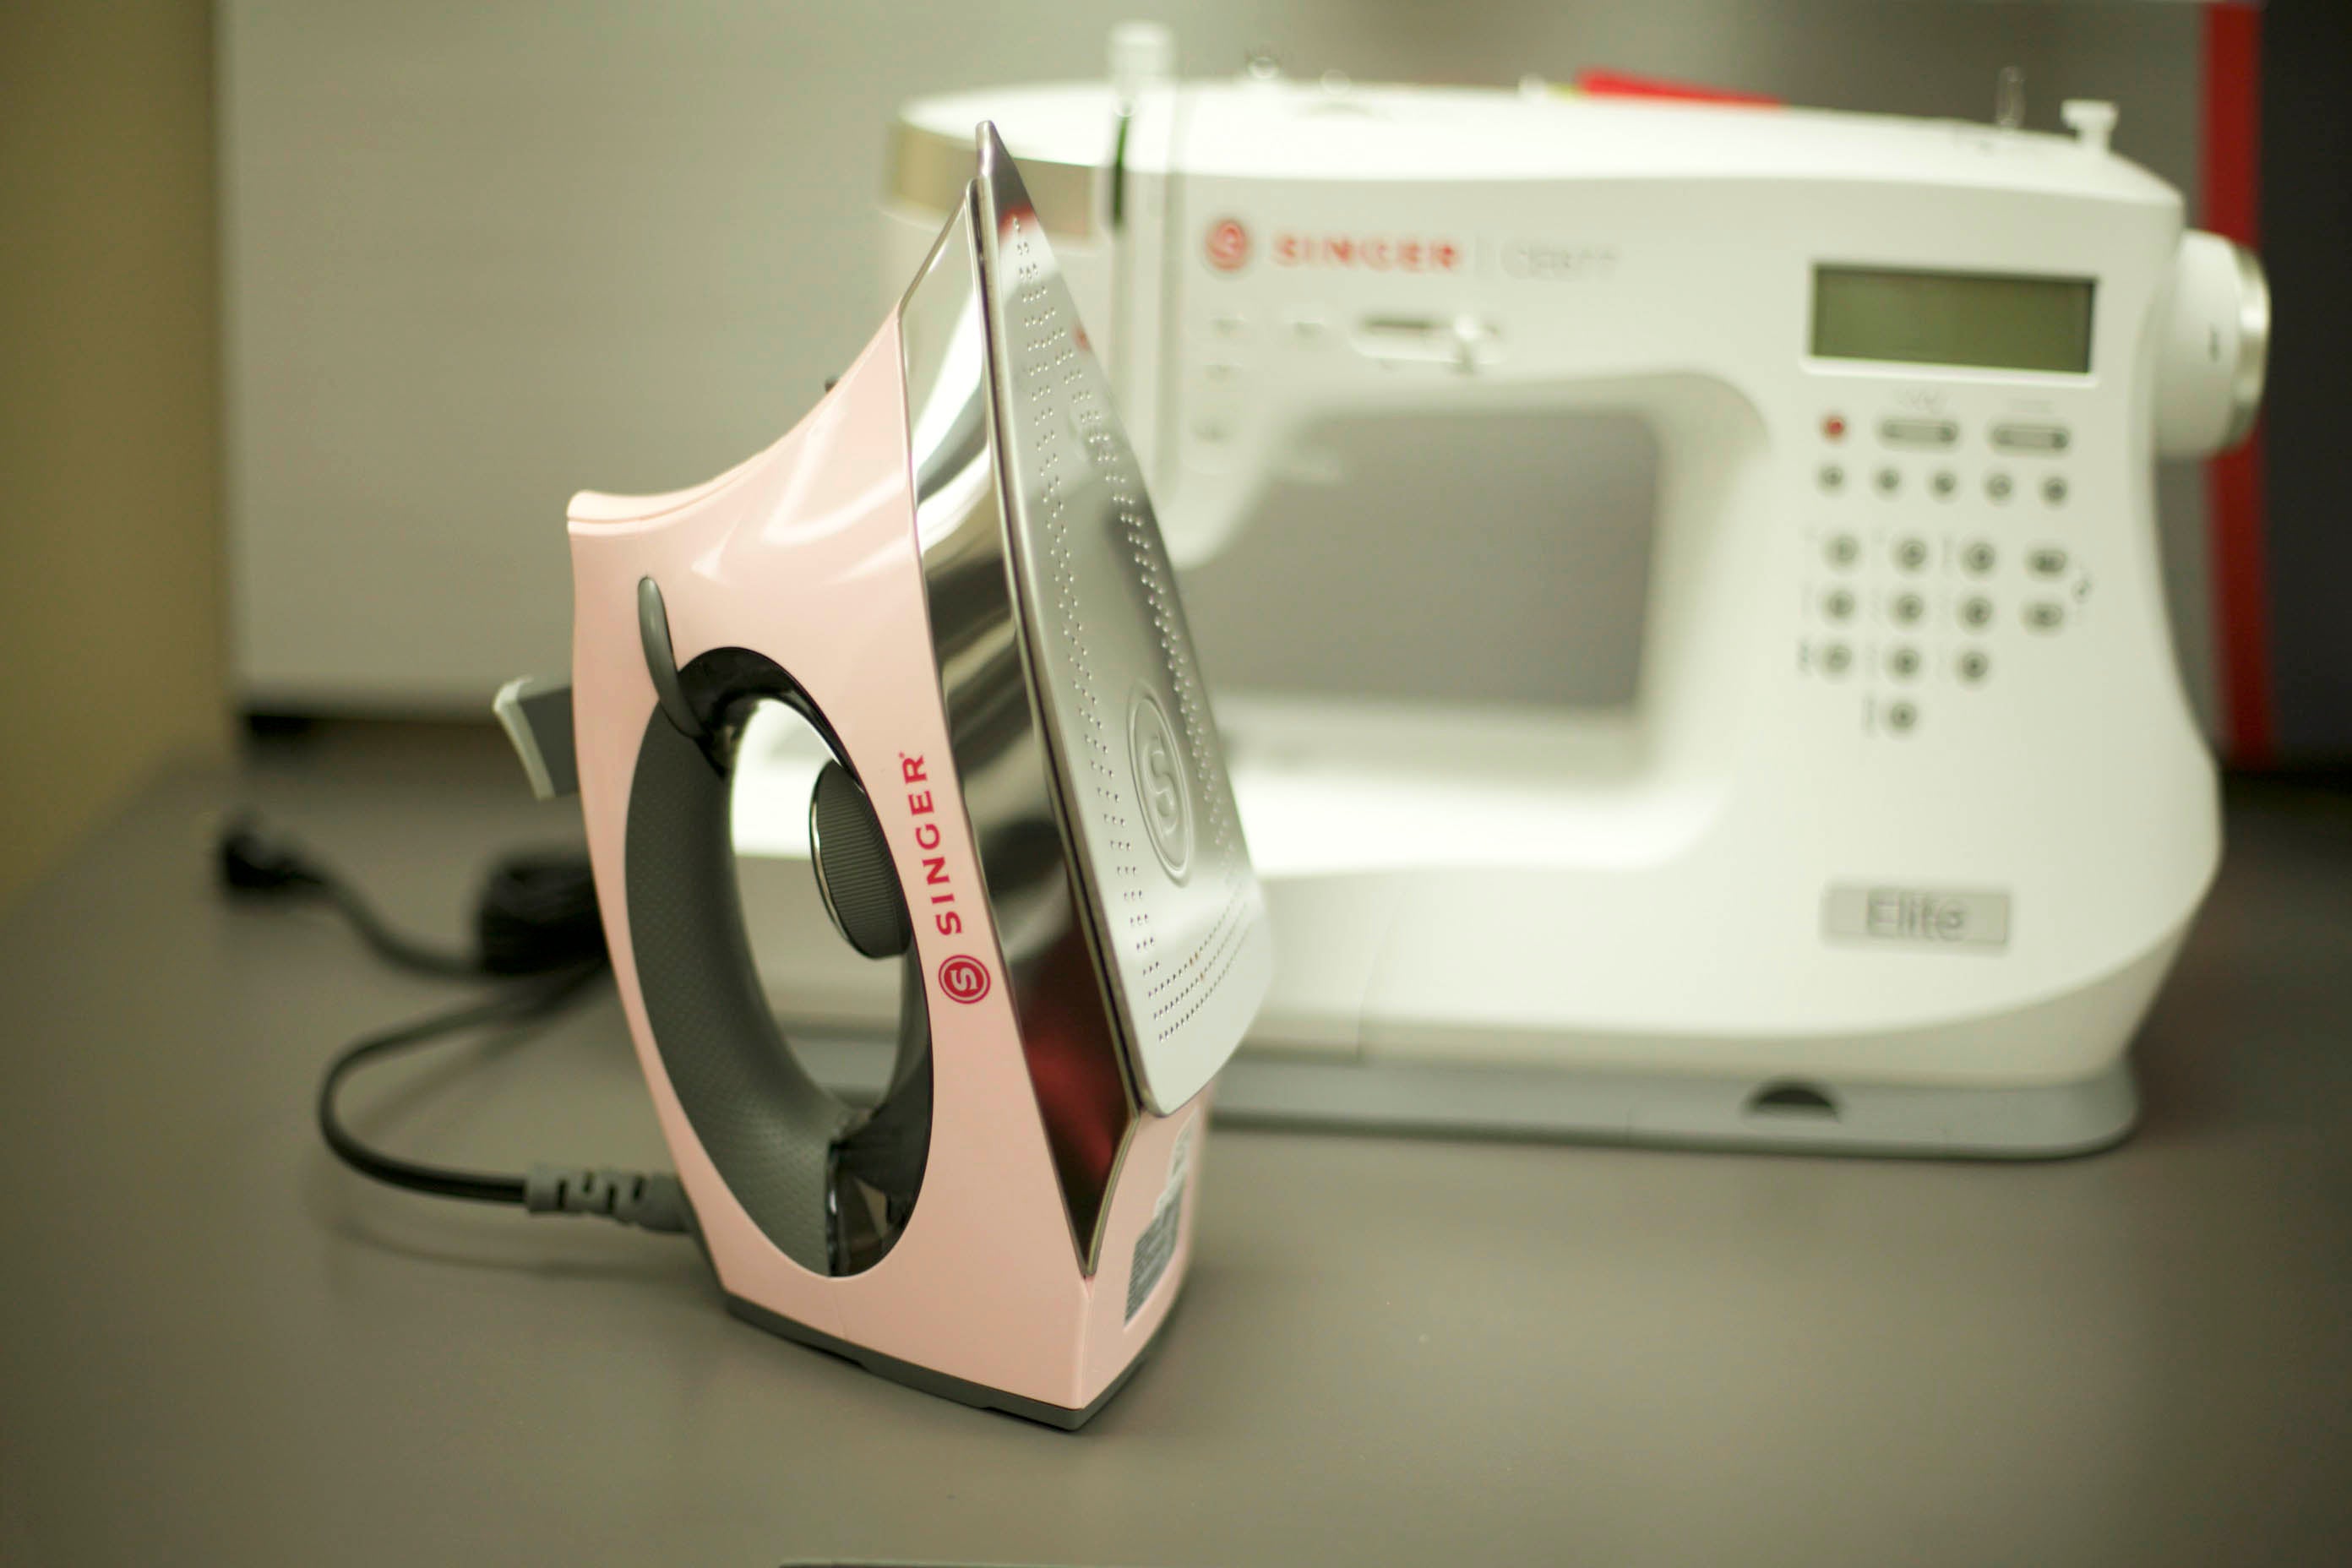  SINGER  Pink SteamCraft Iron with OnPoint Tip, 300ml Tank  Capacity, & 1700 Watts : Home & Kitchen